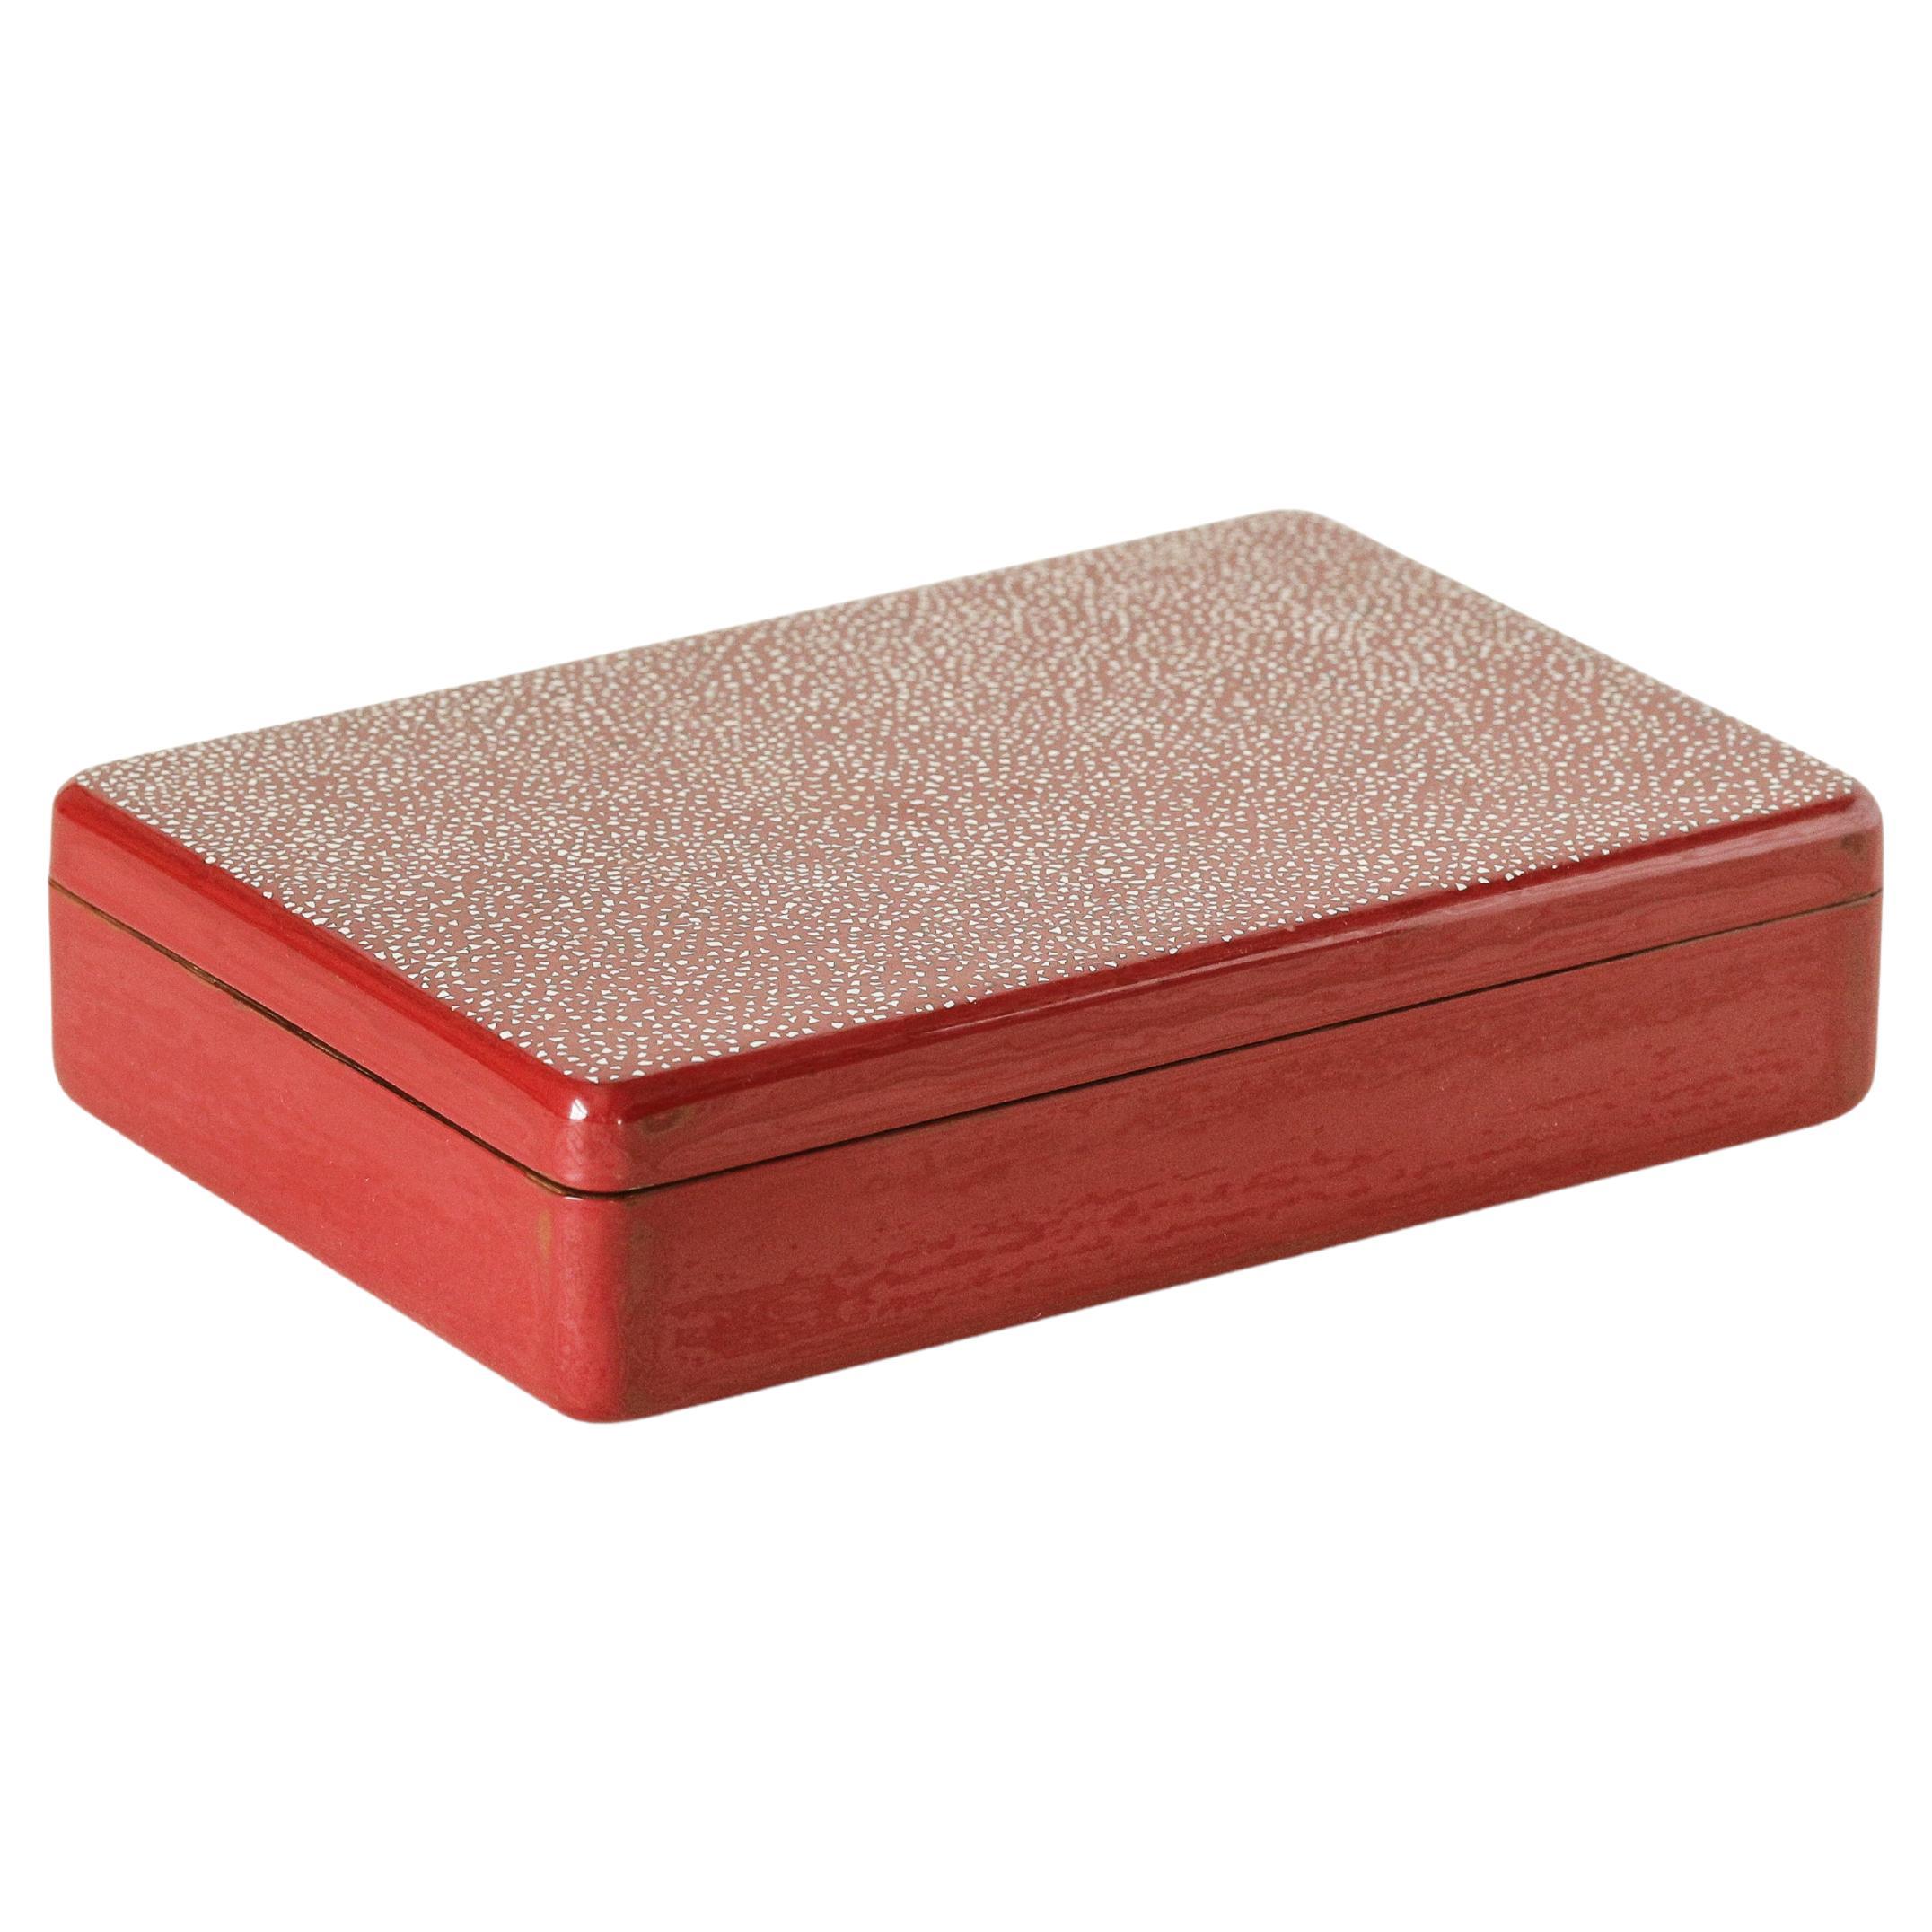 Urushi Natural Red Lacquer Allsorts Box - Large by Alexander Lamont For Sale